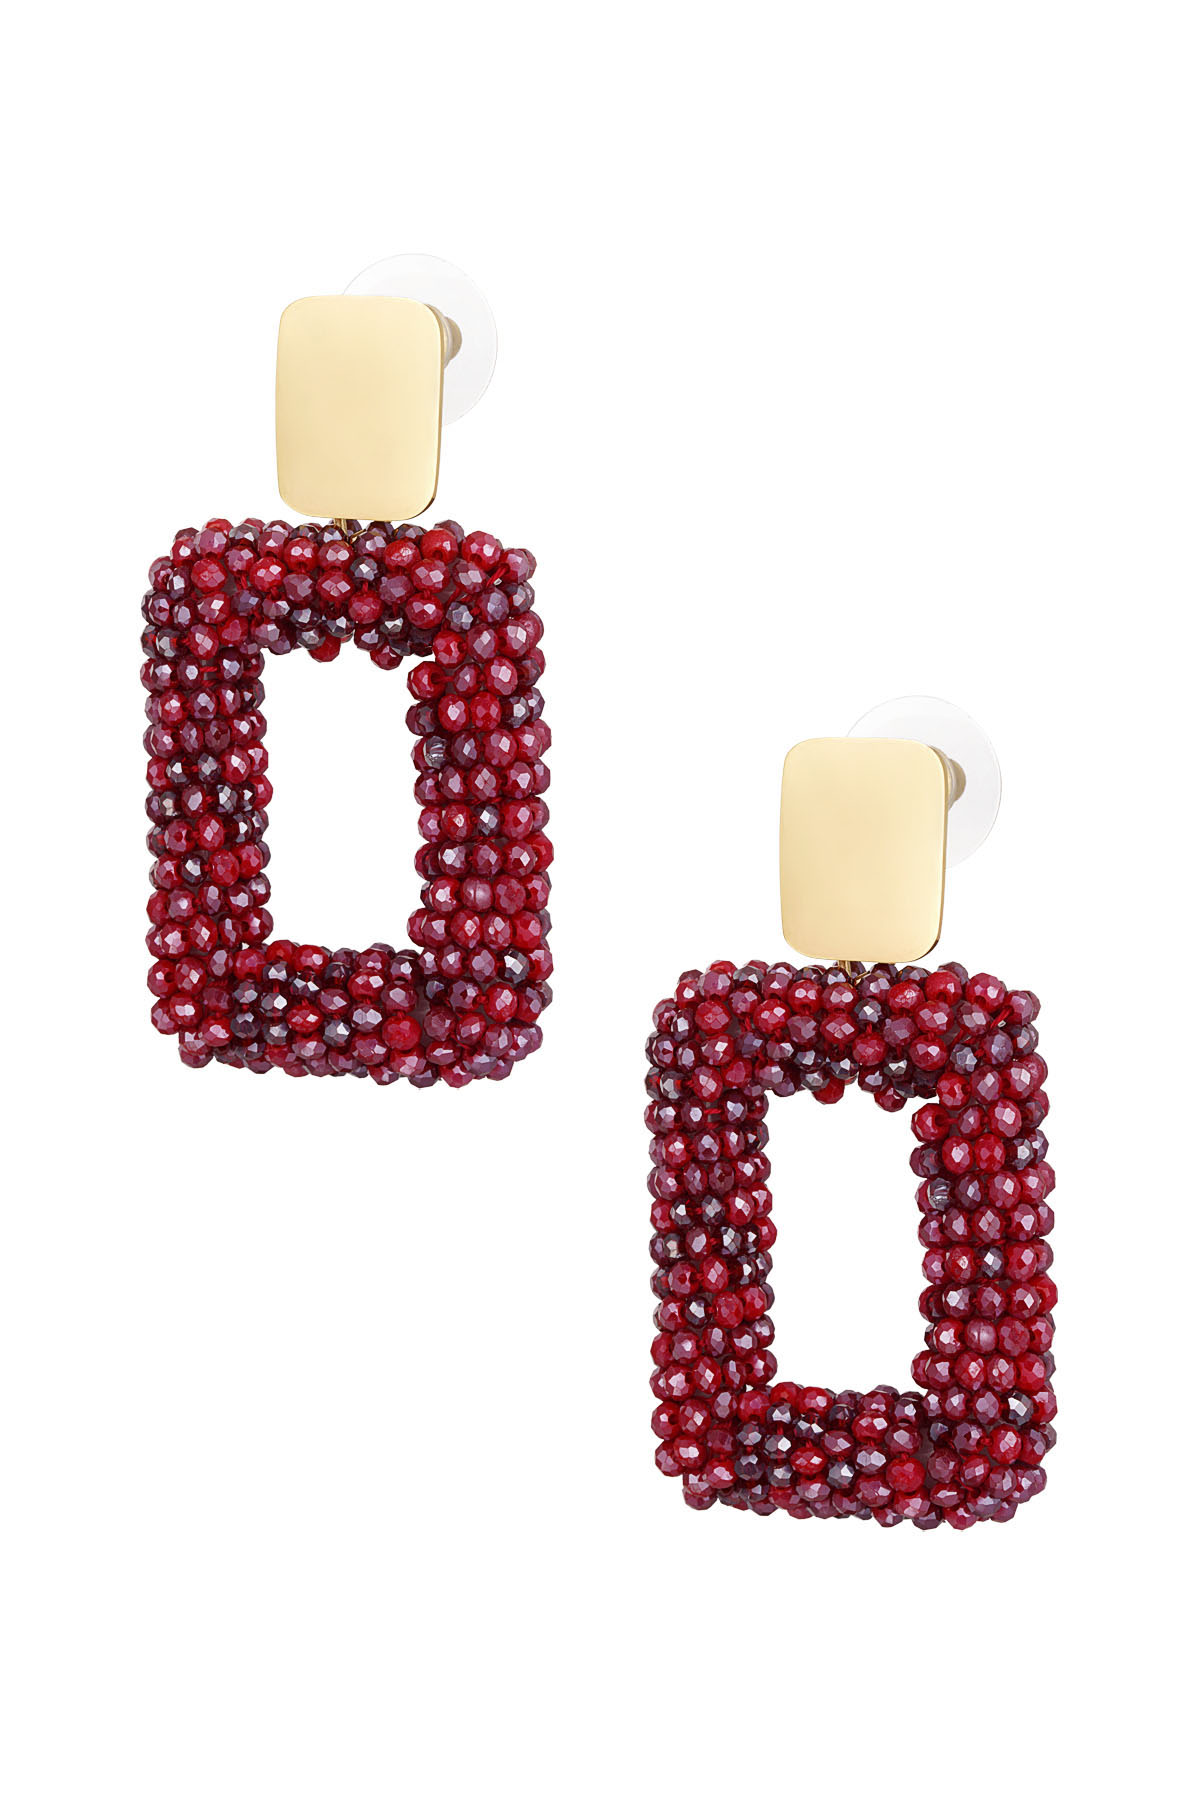 rectangle earrings with glass beads - red h5 